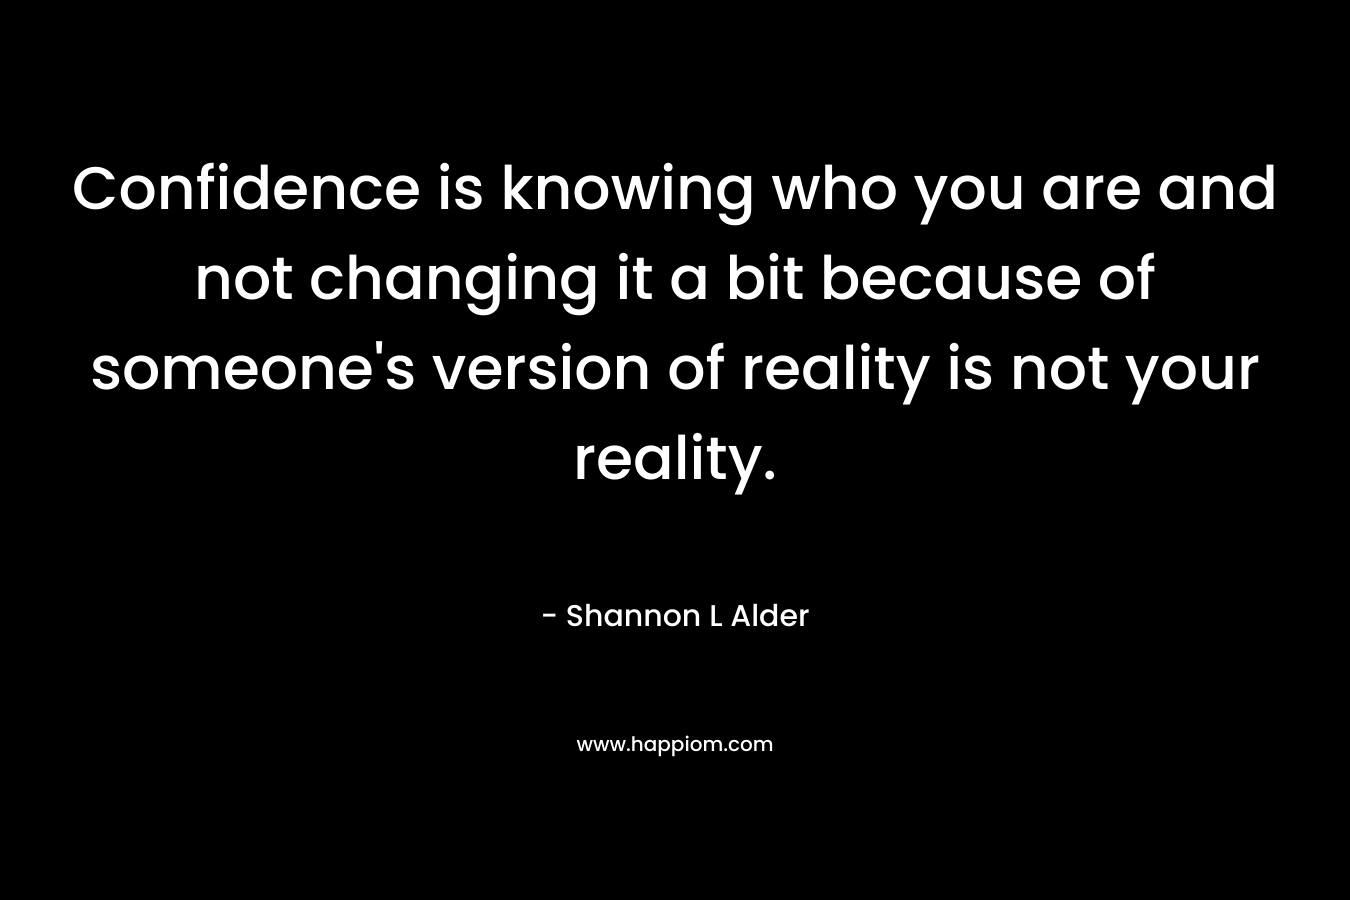 Confidence is knowing who you are and not changing it a bit because of someone's version of reality is not your reality.